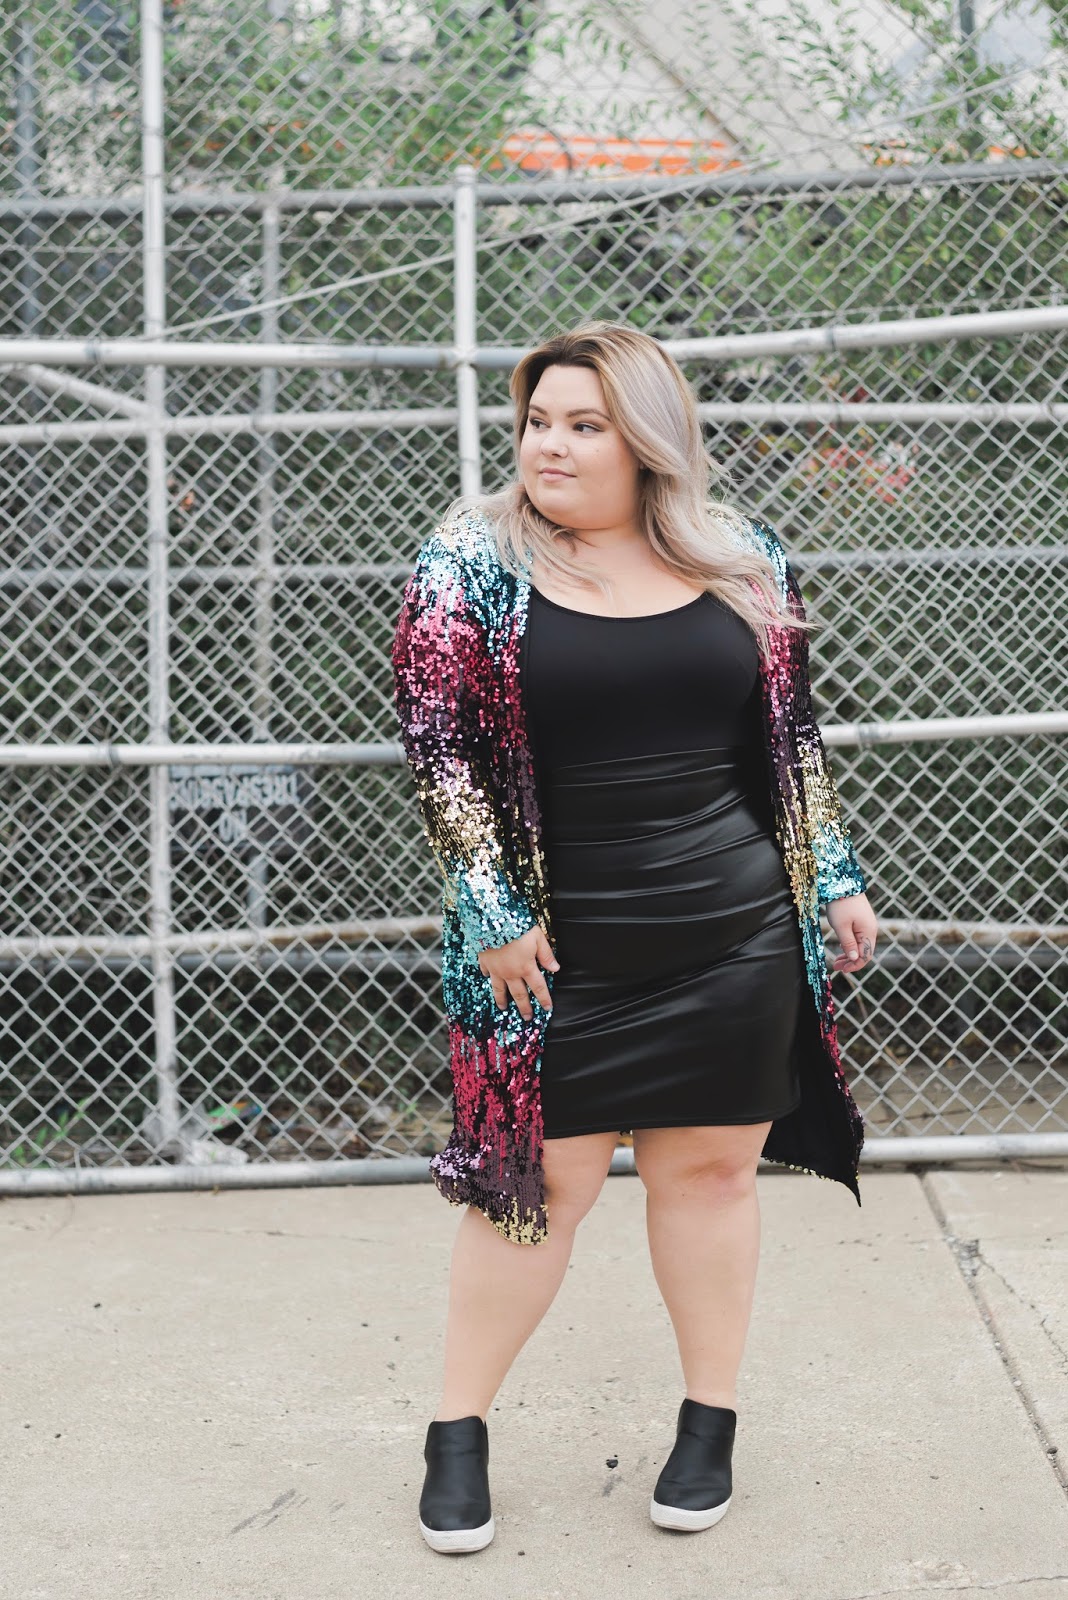 natalie Craig, natalie in the city, Chicago plus size fashion blogger, Chicago plus size model, sequin blazer, plus size sequins, wedge sneakers, inavie boutique, affordable plus size fashion, sequins fall 2017, how to wear sequins, plus model magazine, midwest blogger, Chicago fashion, rainbow sequins, curves and confidence